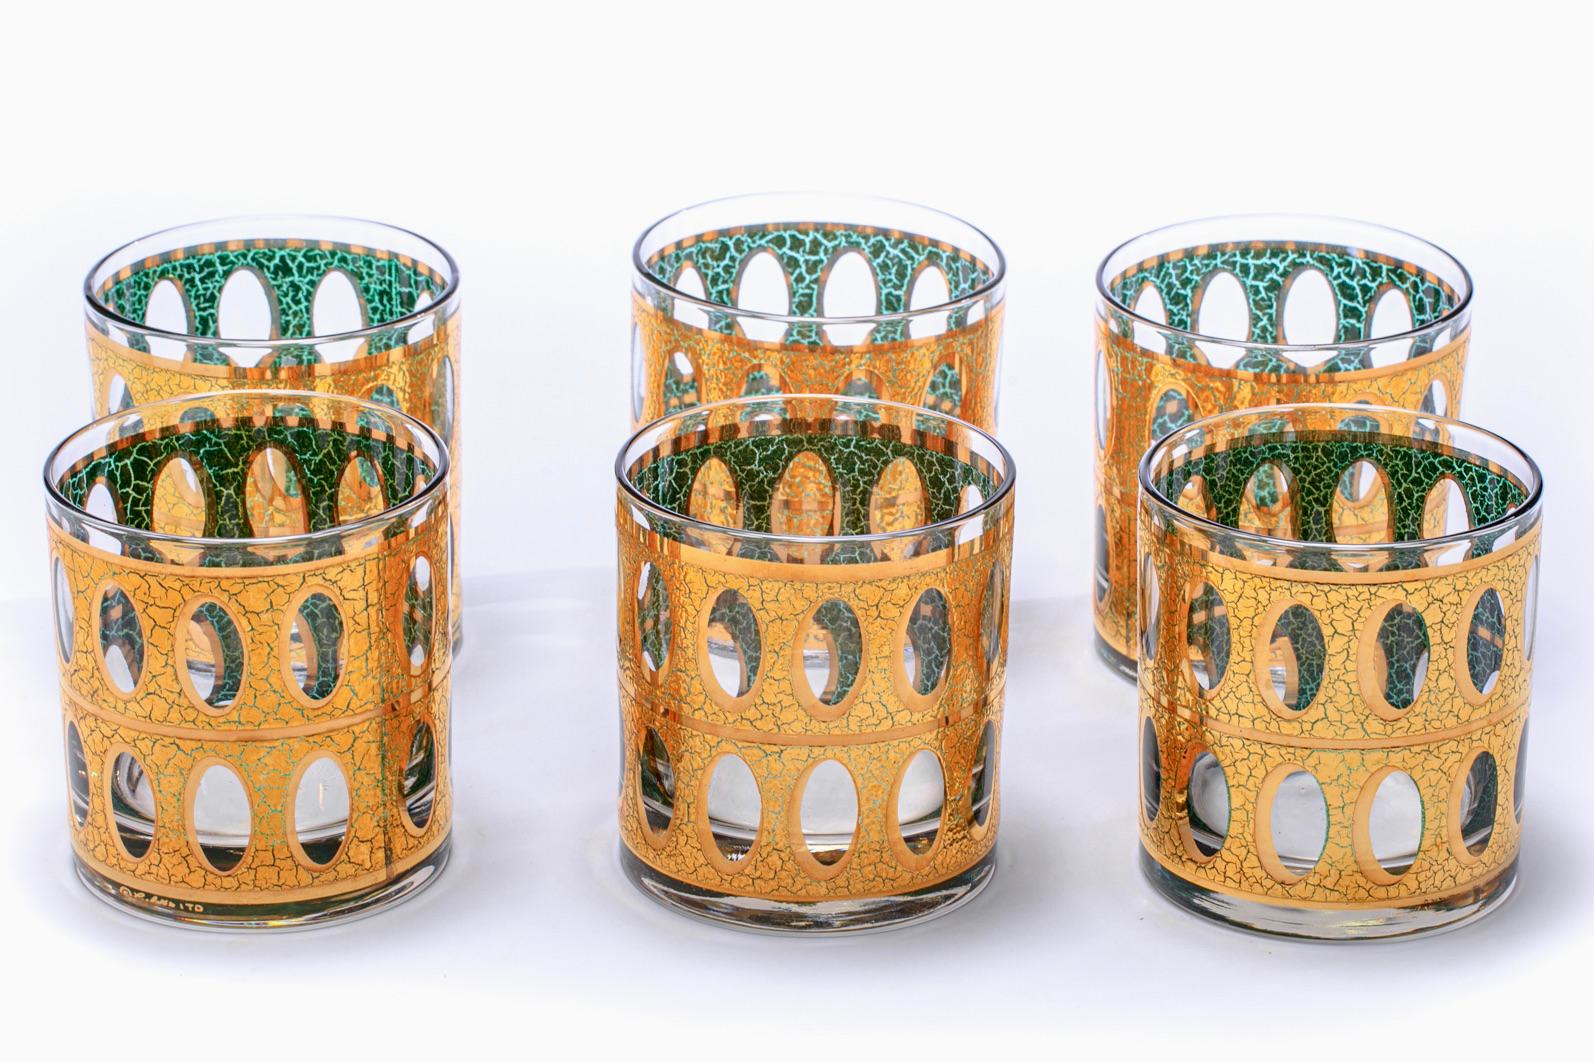 Mid Century Modern 22K Gold Cocktail Mixer and Set of 6 Rocks Glasses, c. 1965 For Sale 2